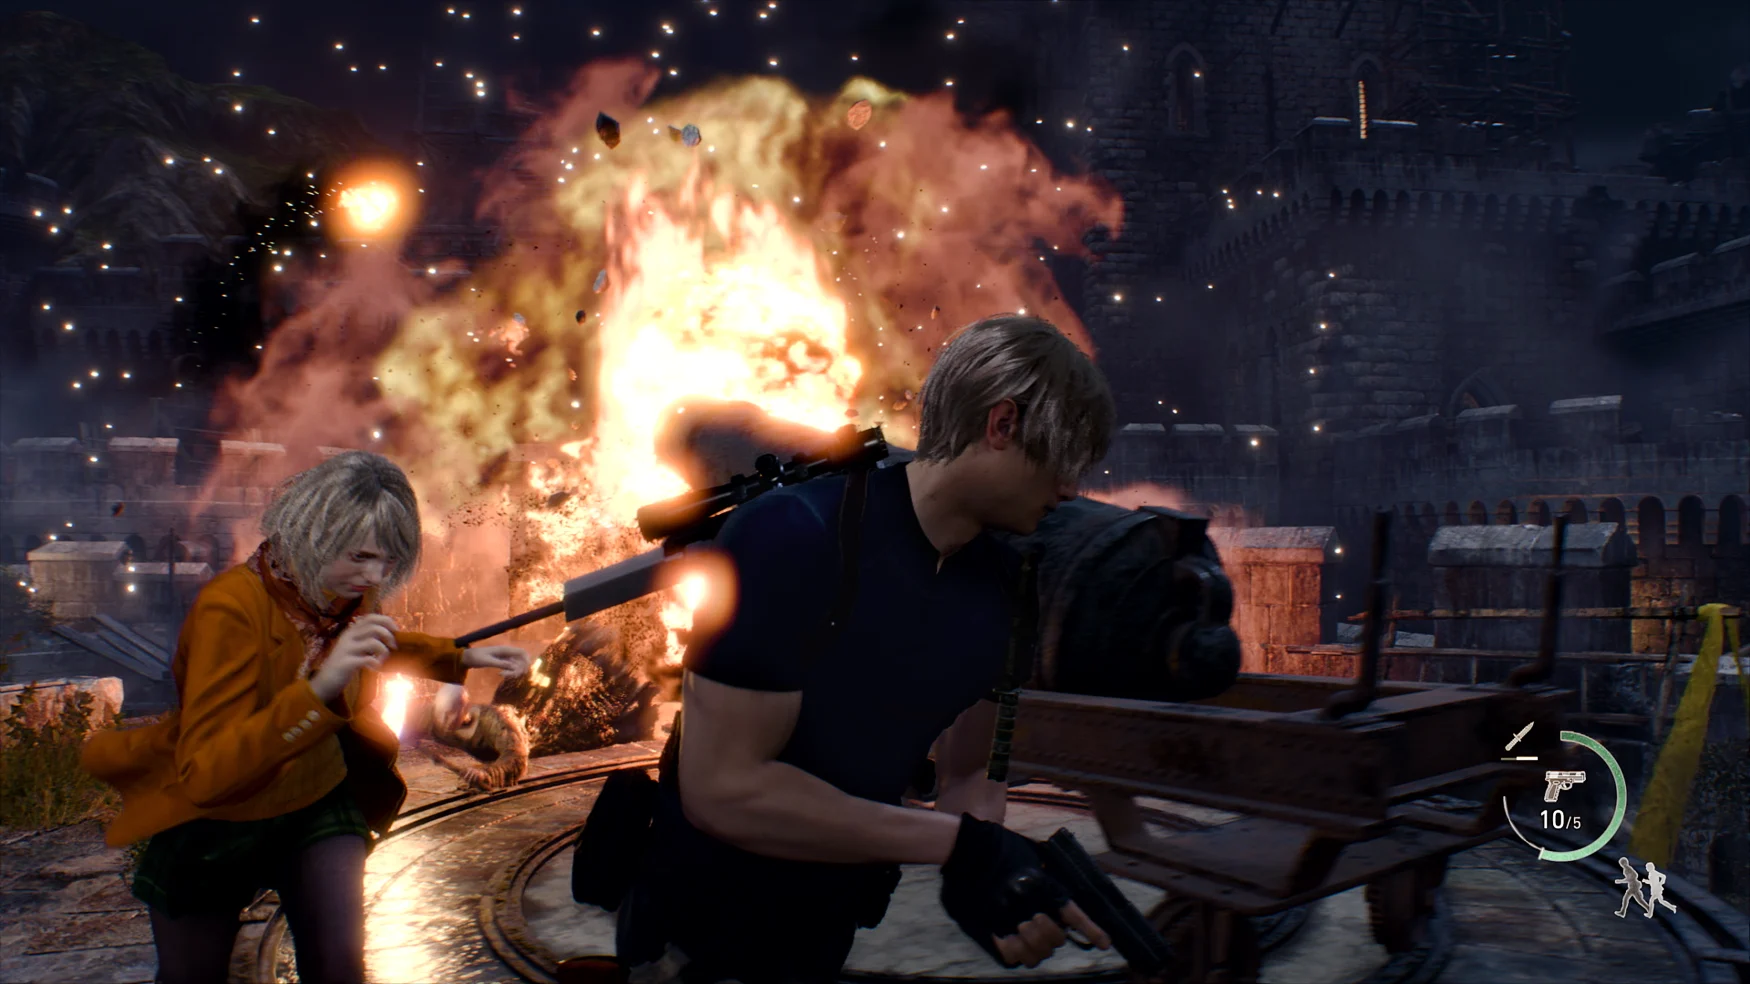 Ashley and Leon are fleeing an explosion on a castle turret in Resident Evil 4.